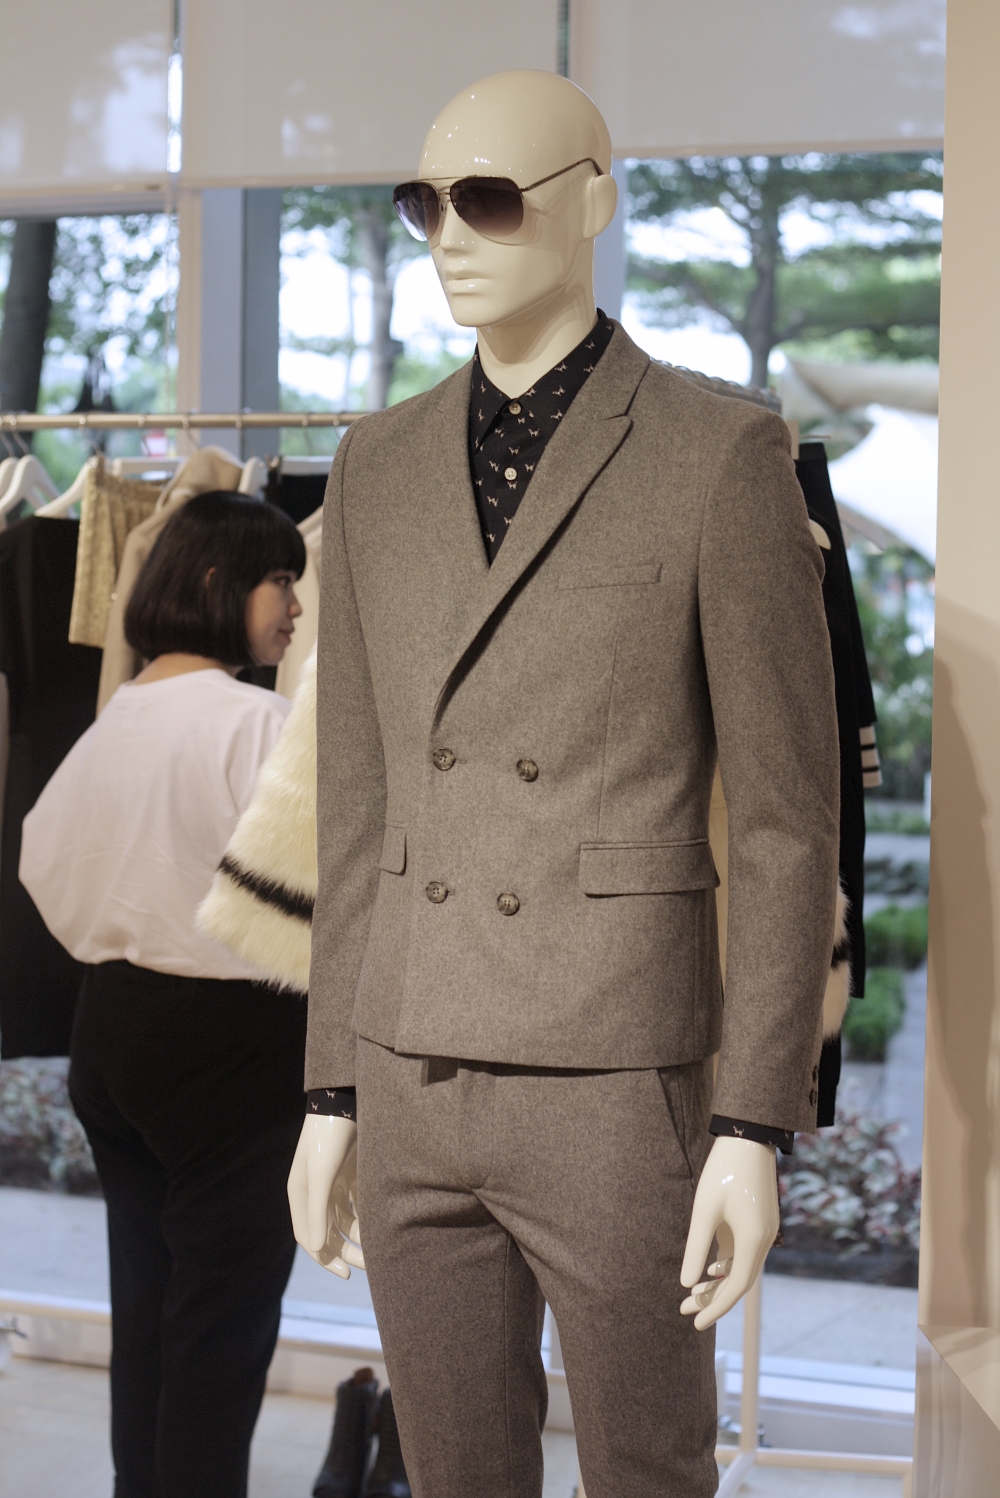 H&M INDONESIA FALL WINTER 2013, SUIT, MENSWEAR